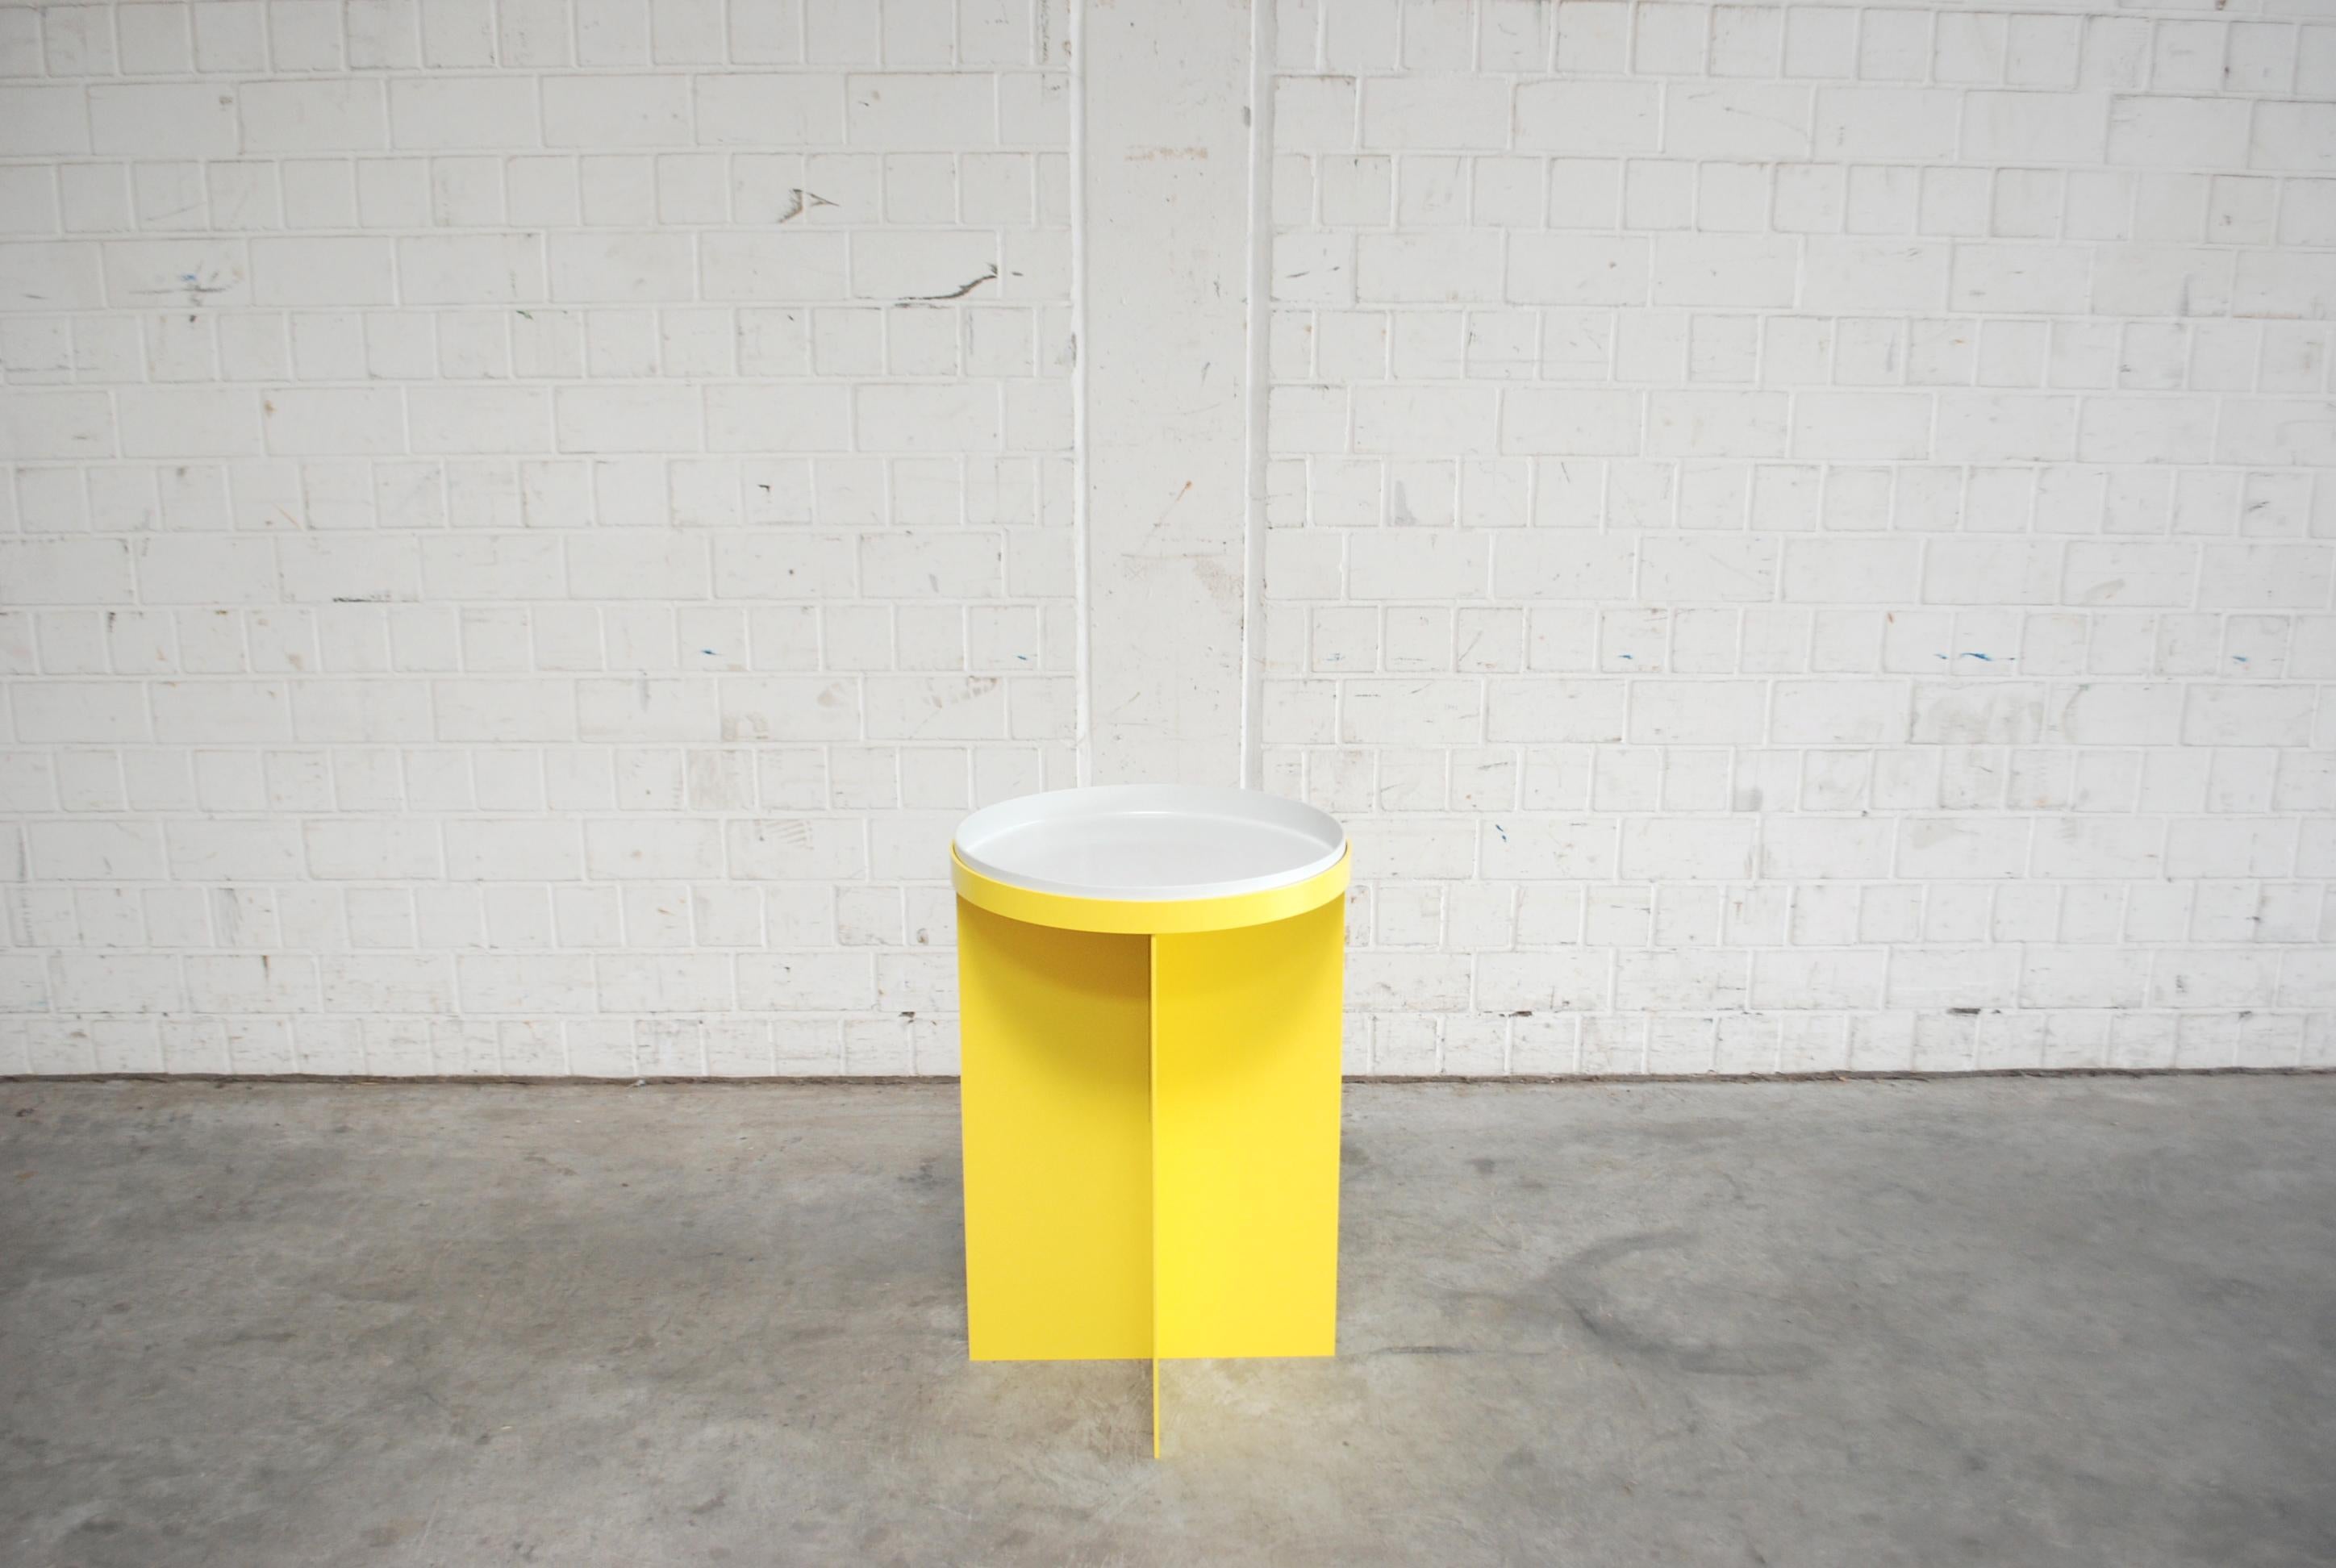 Minimalist sculptural aluminum side or coffee table with removable tray.
Colors: table aluminum coated in yellow lacquer and removable tray in white colour.
There is also a low tray table in aluminum stock see the last image.
These furniture’s